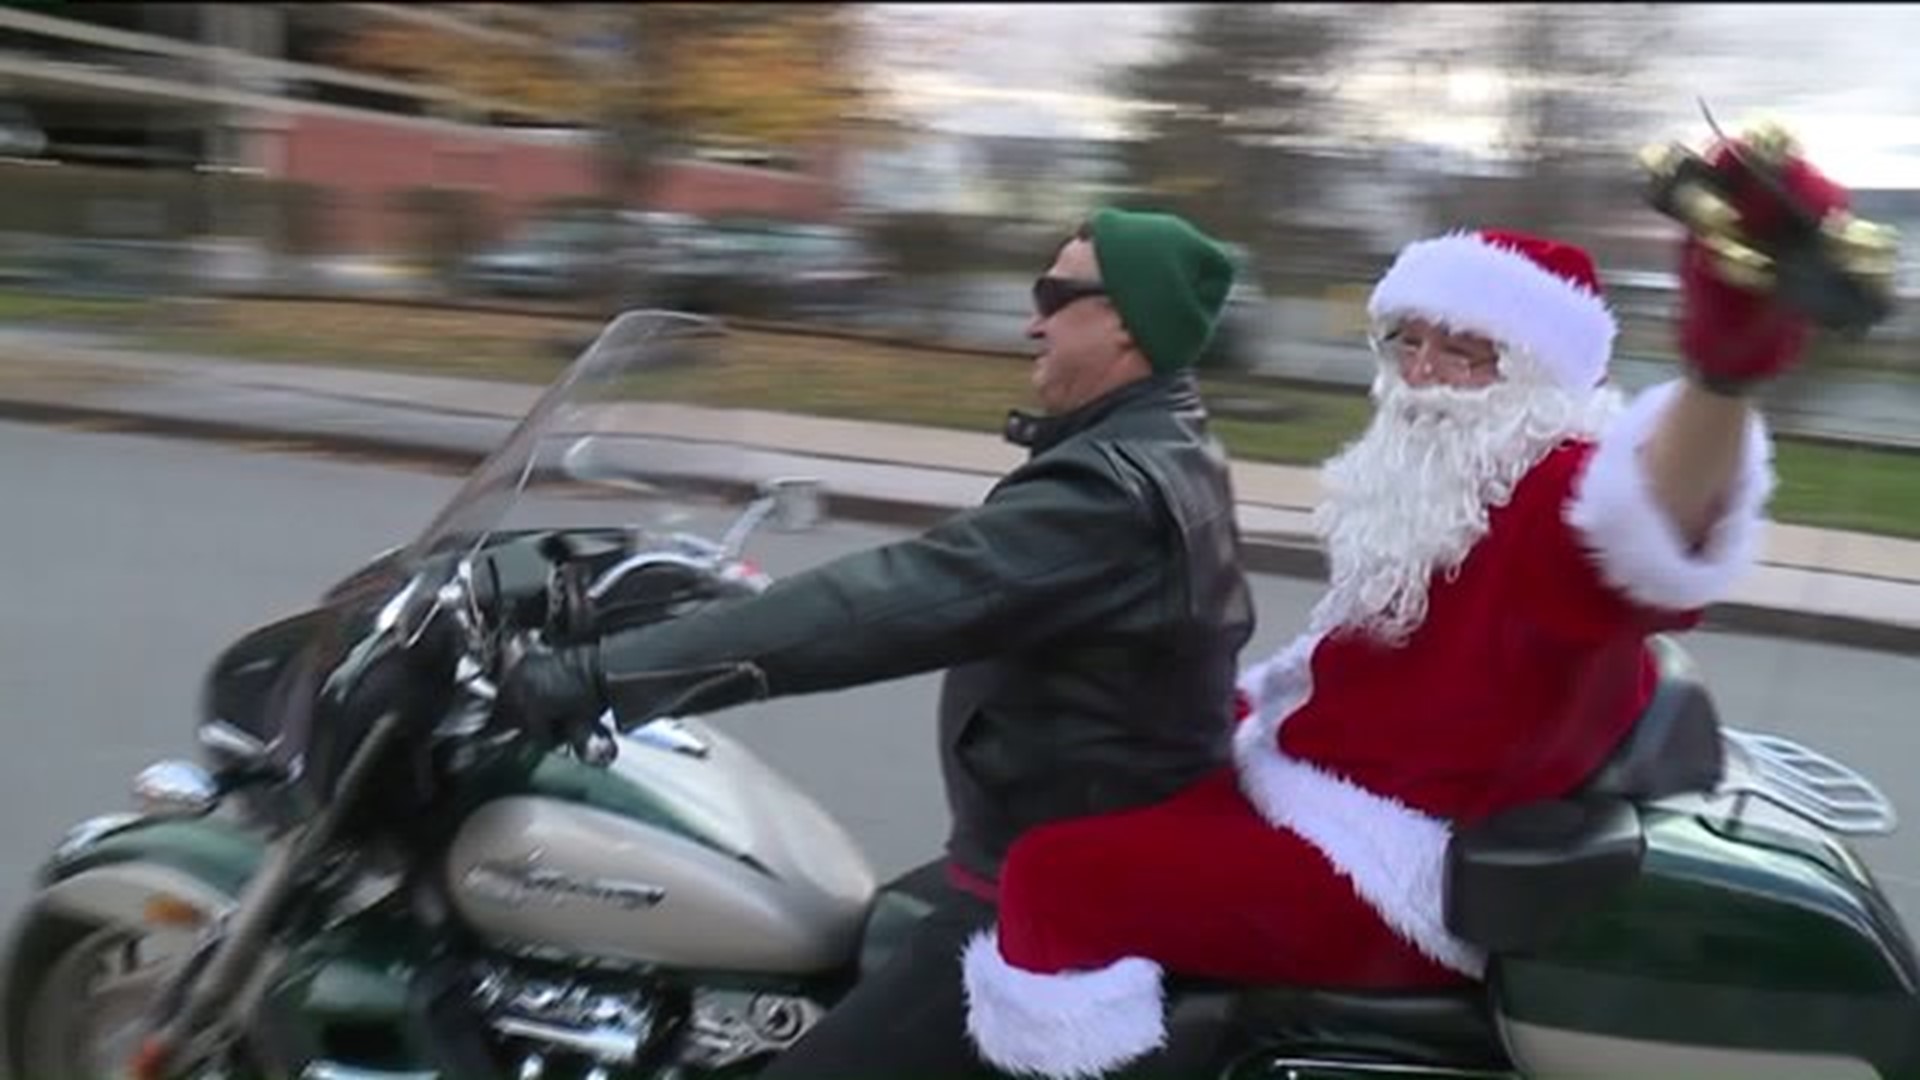 Biker Santa Hands Out Gifts to Children in Wilkes-Barre